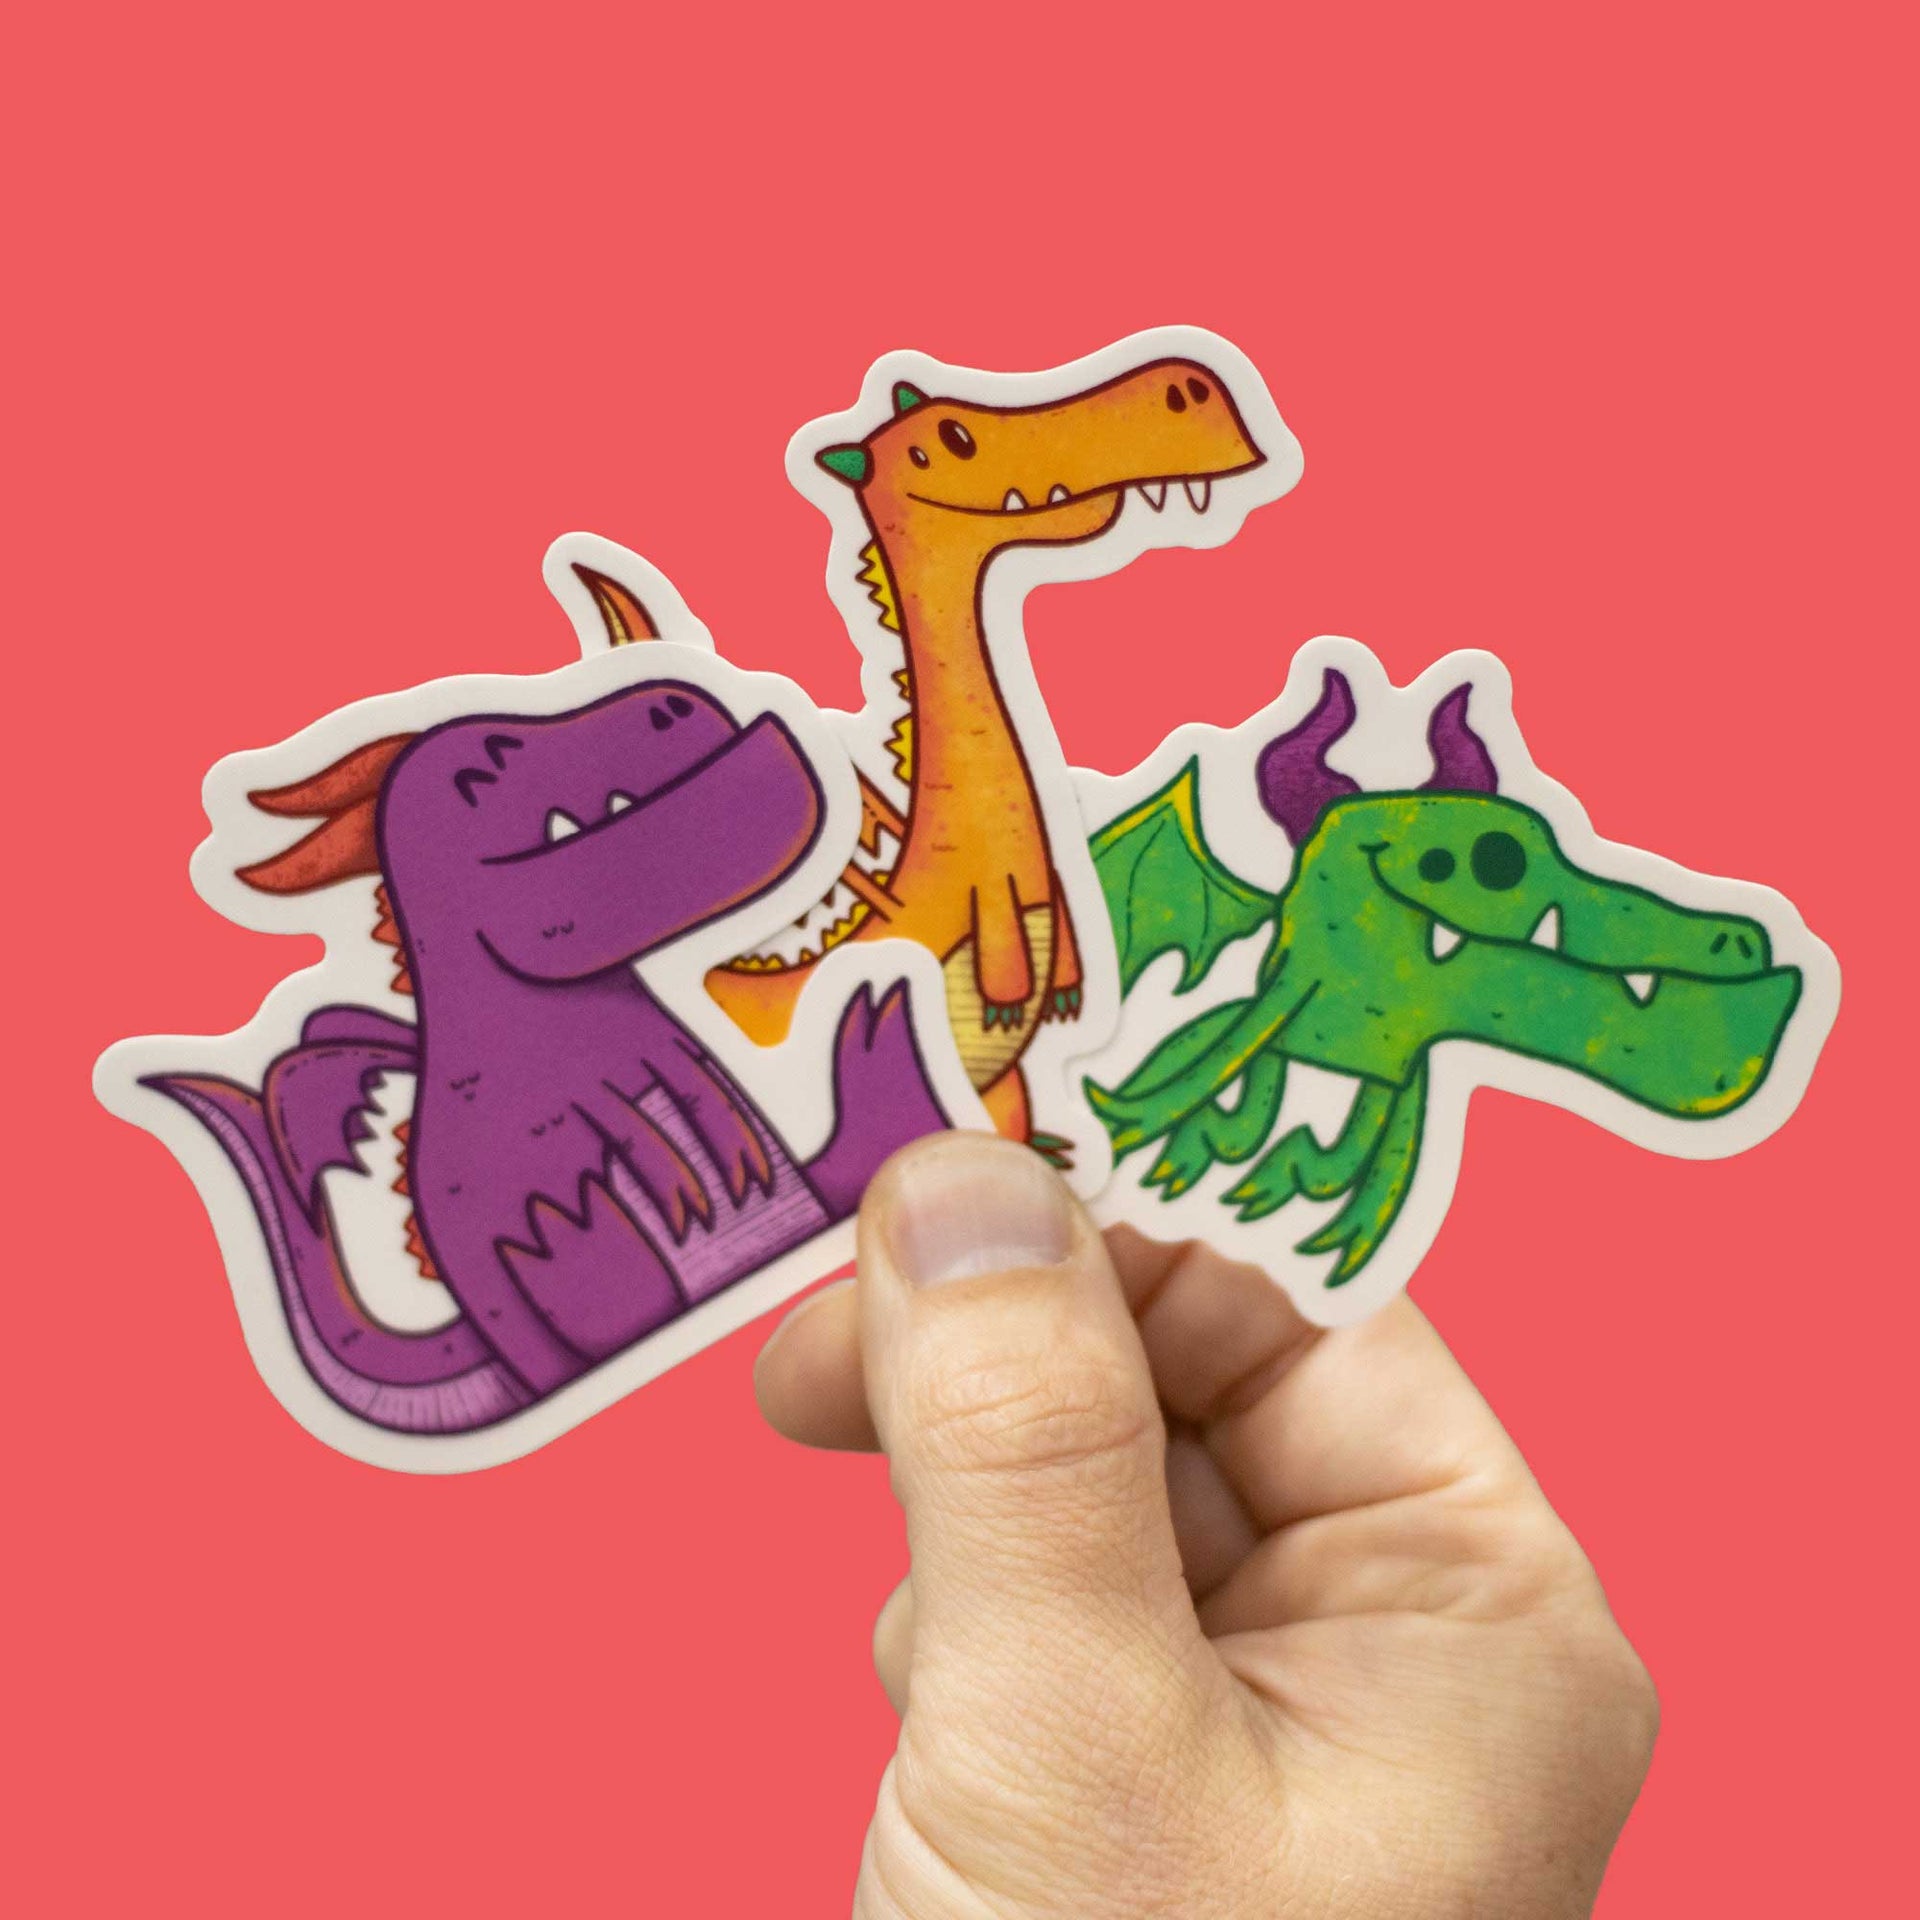 3 dragon stickers in hand